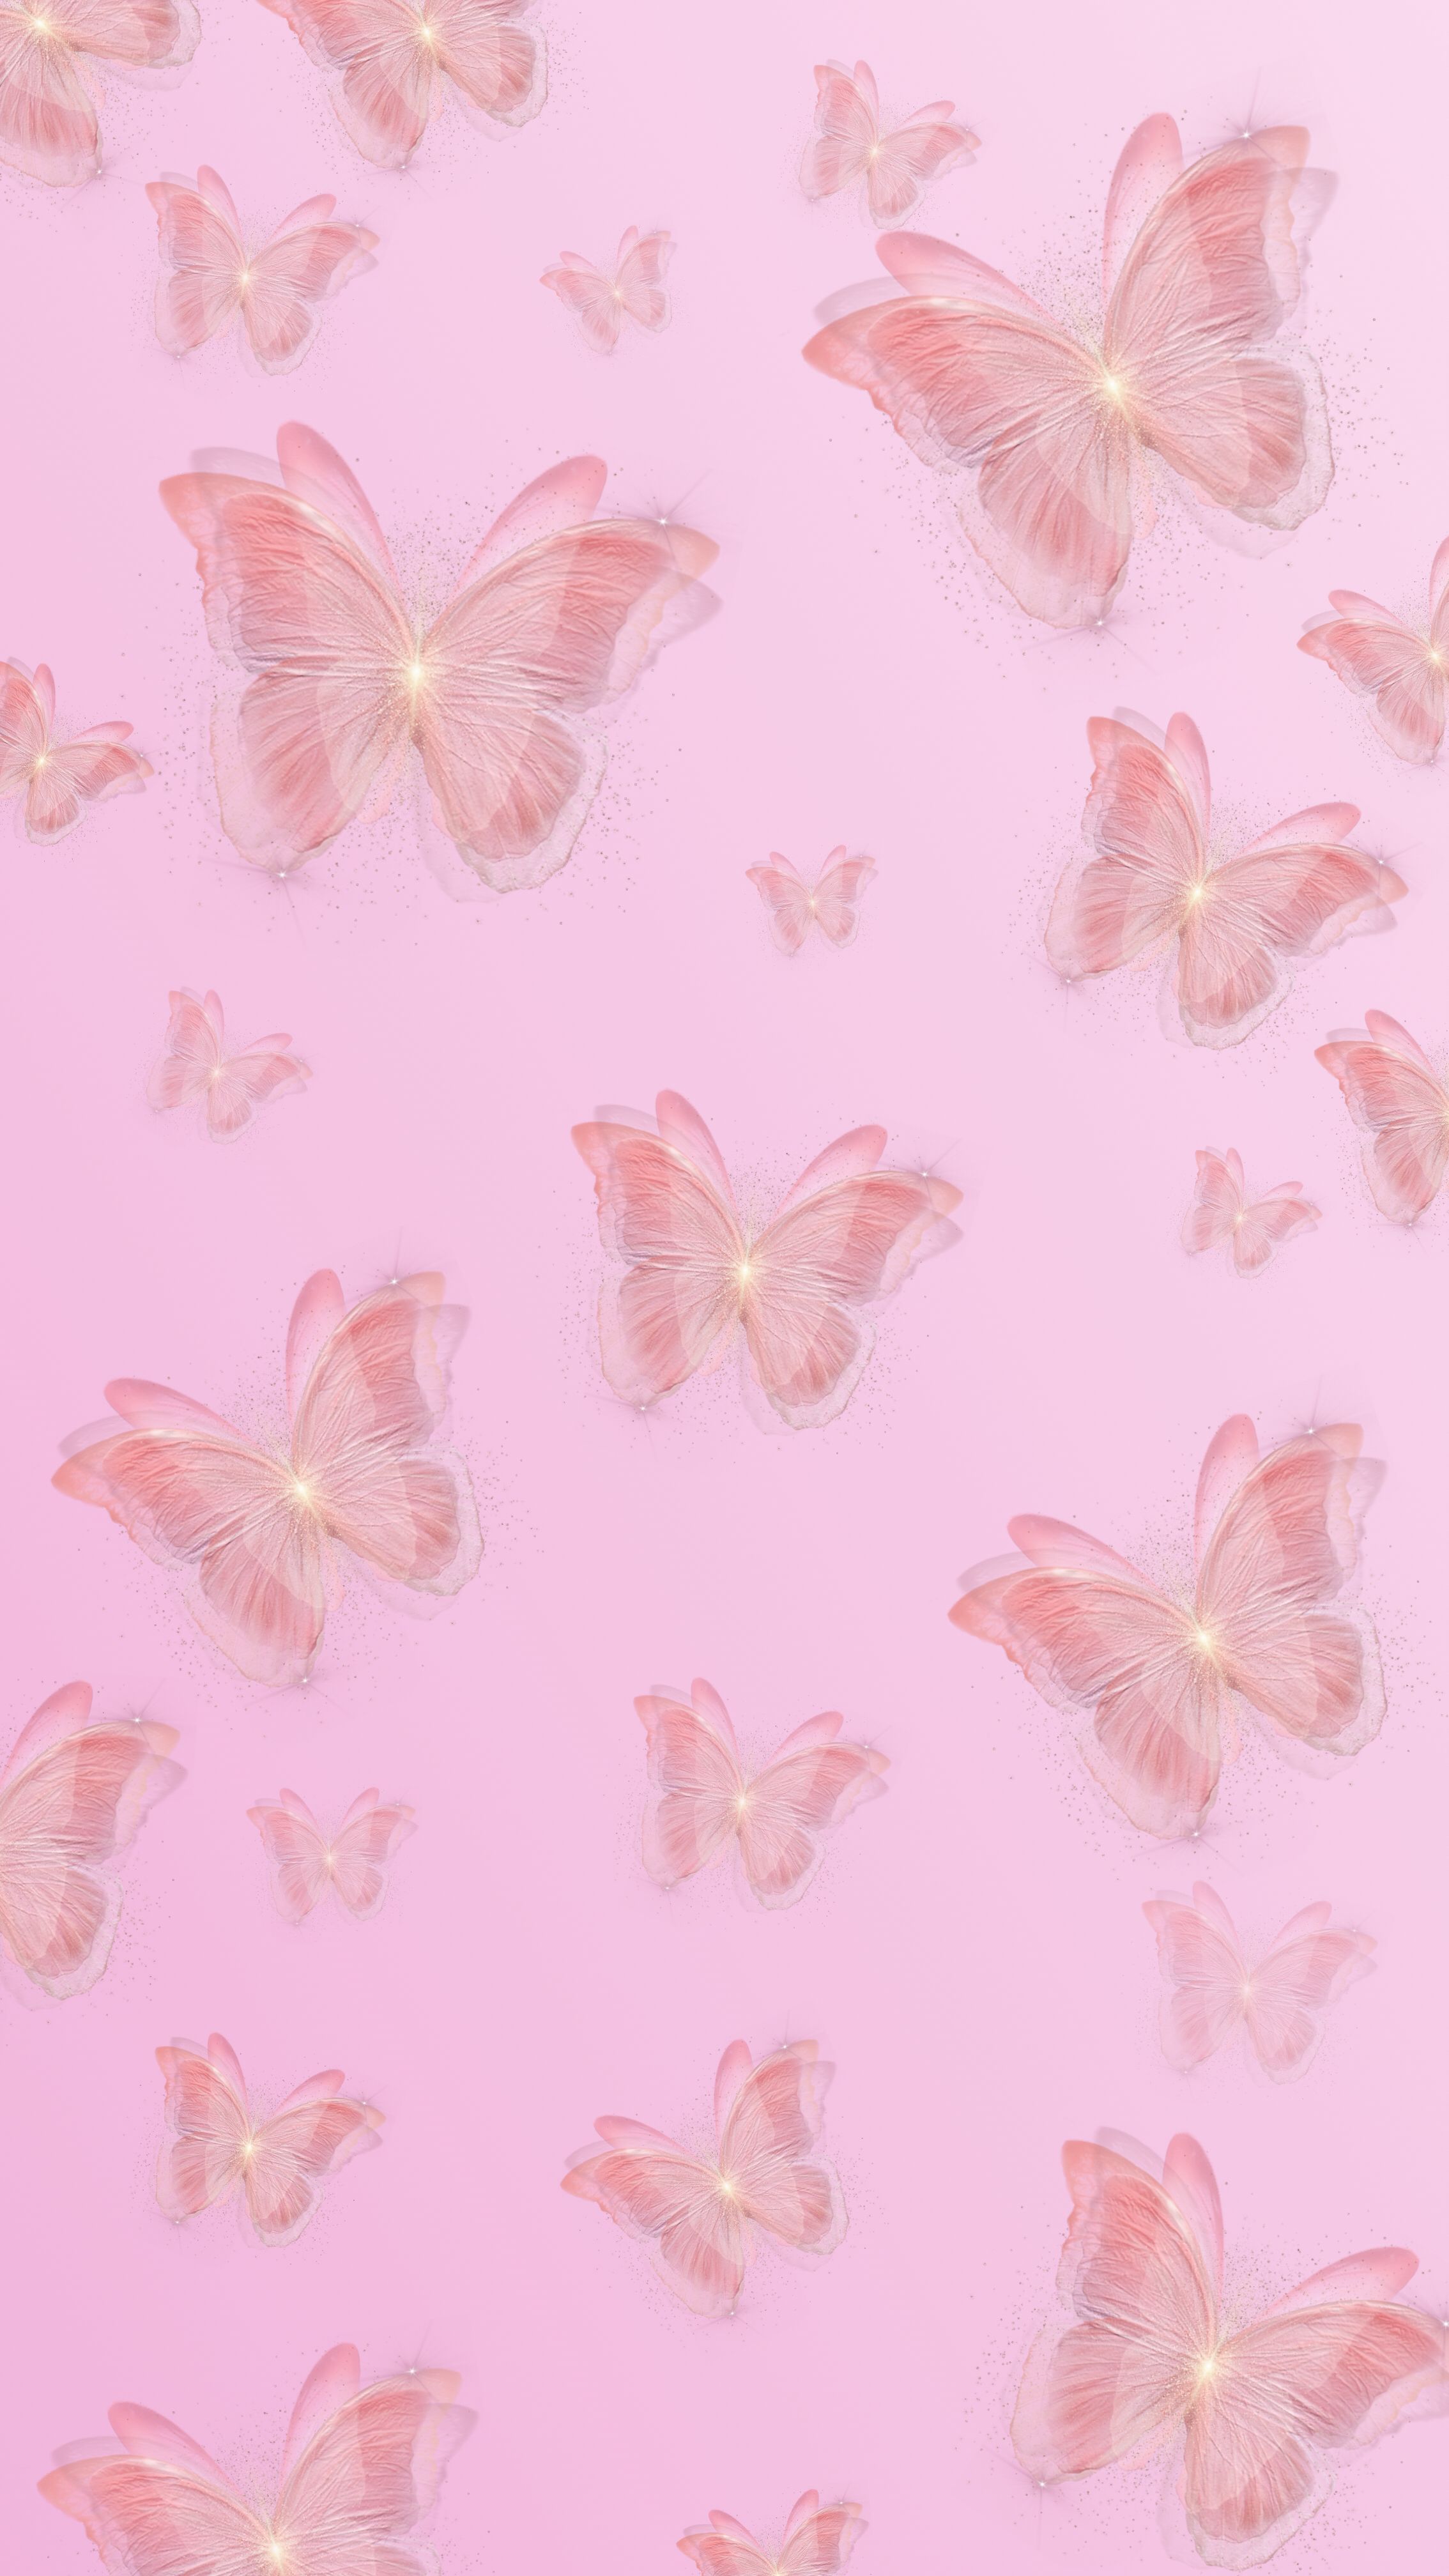 Pink aesthetic butterfly wallpaper background phone aesthetic - Cute pink